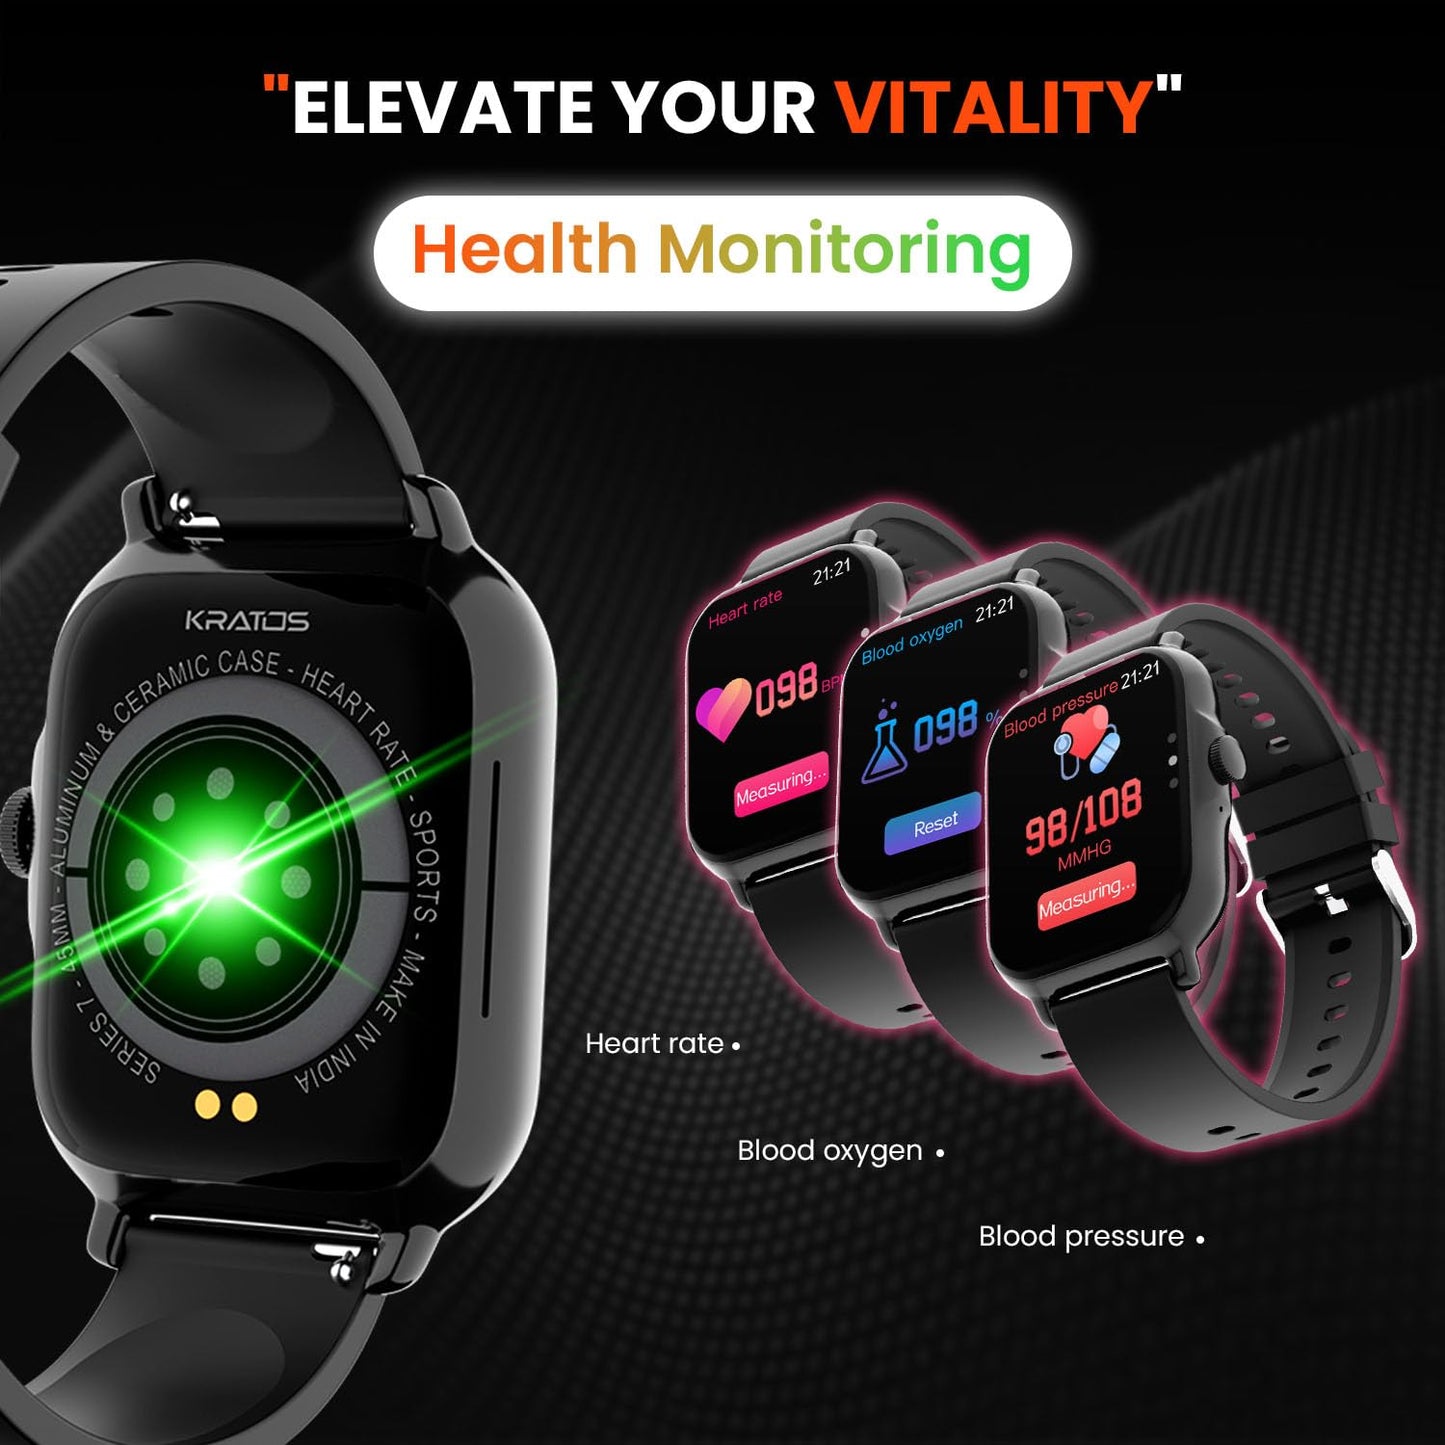 Kratos SW14 Smart Watch for Men and Women with Bluetooth Calling, 1.85" HD Display, IP67 Water Resistant, Long Battery Life, 25+ Sport Modes,SpO2 & Health Monitoring, Smart Watch with 200+ Watch Face